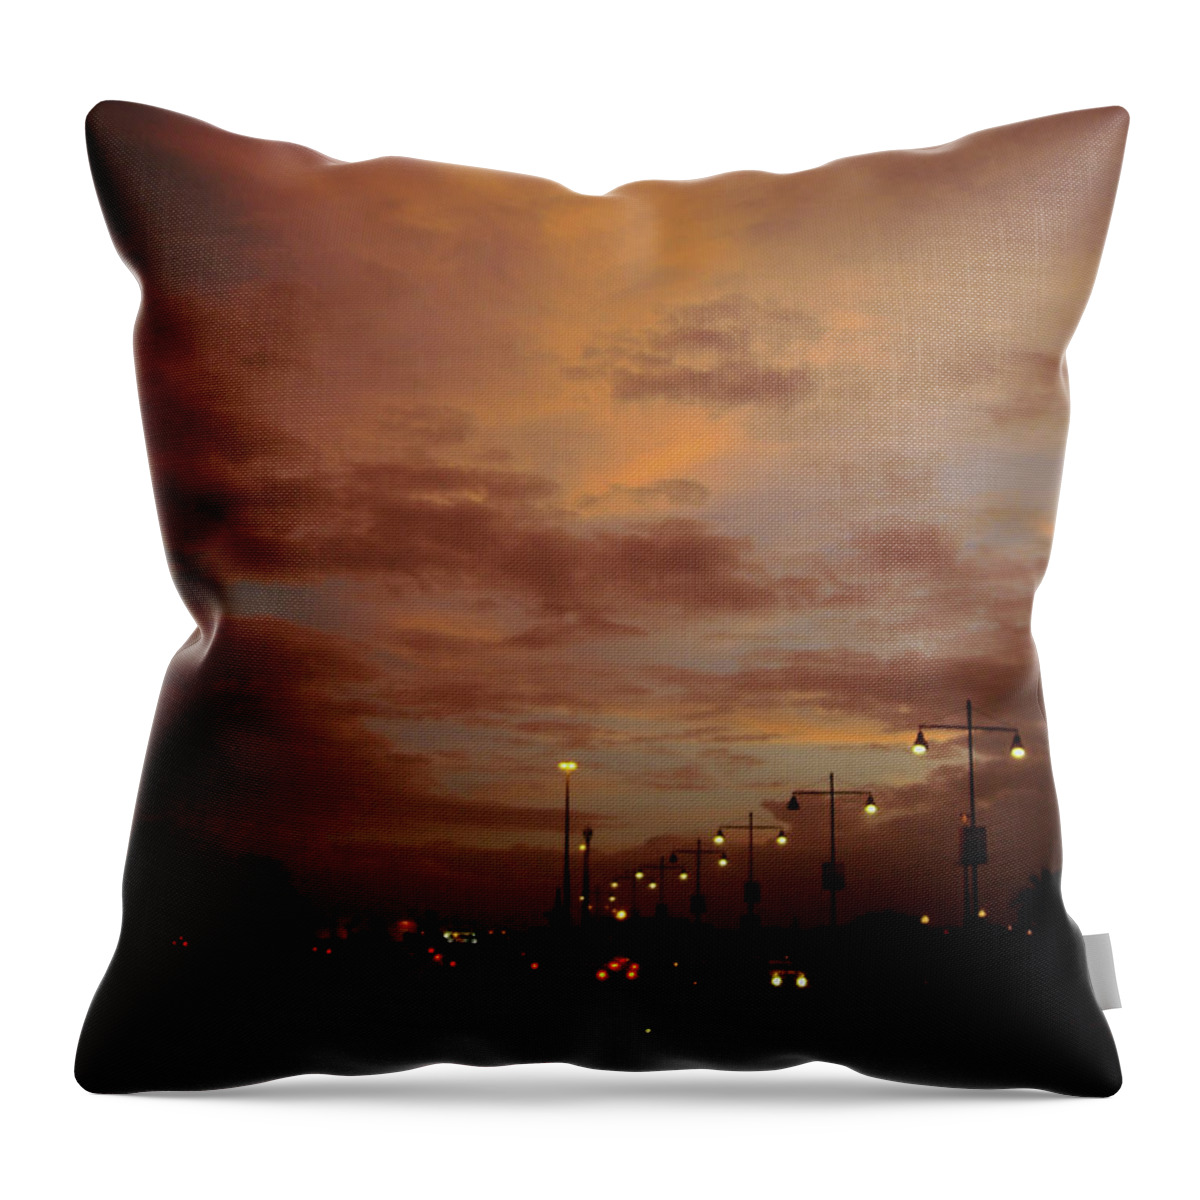 City Throw Pillow featuring the photograph Evening lights on road by Atullya N Srivastava